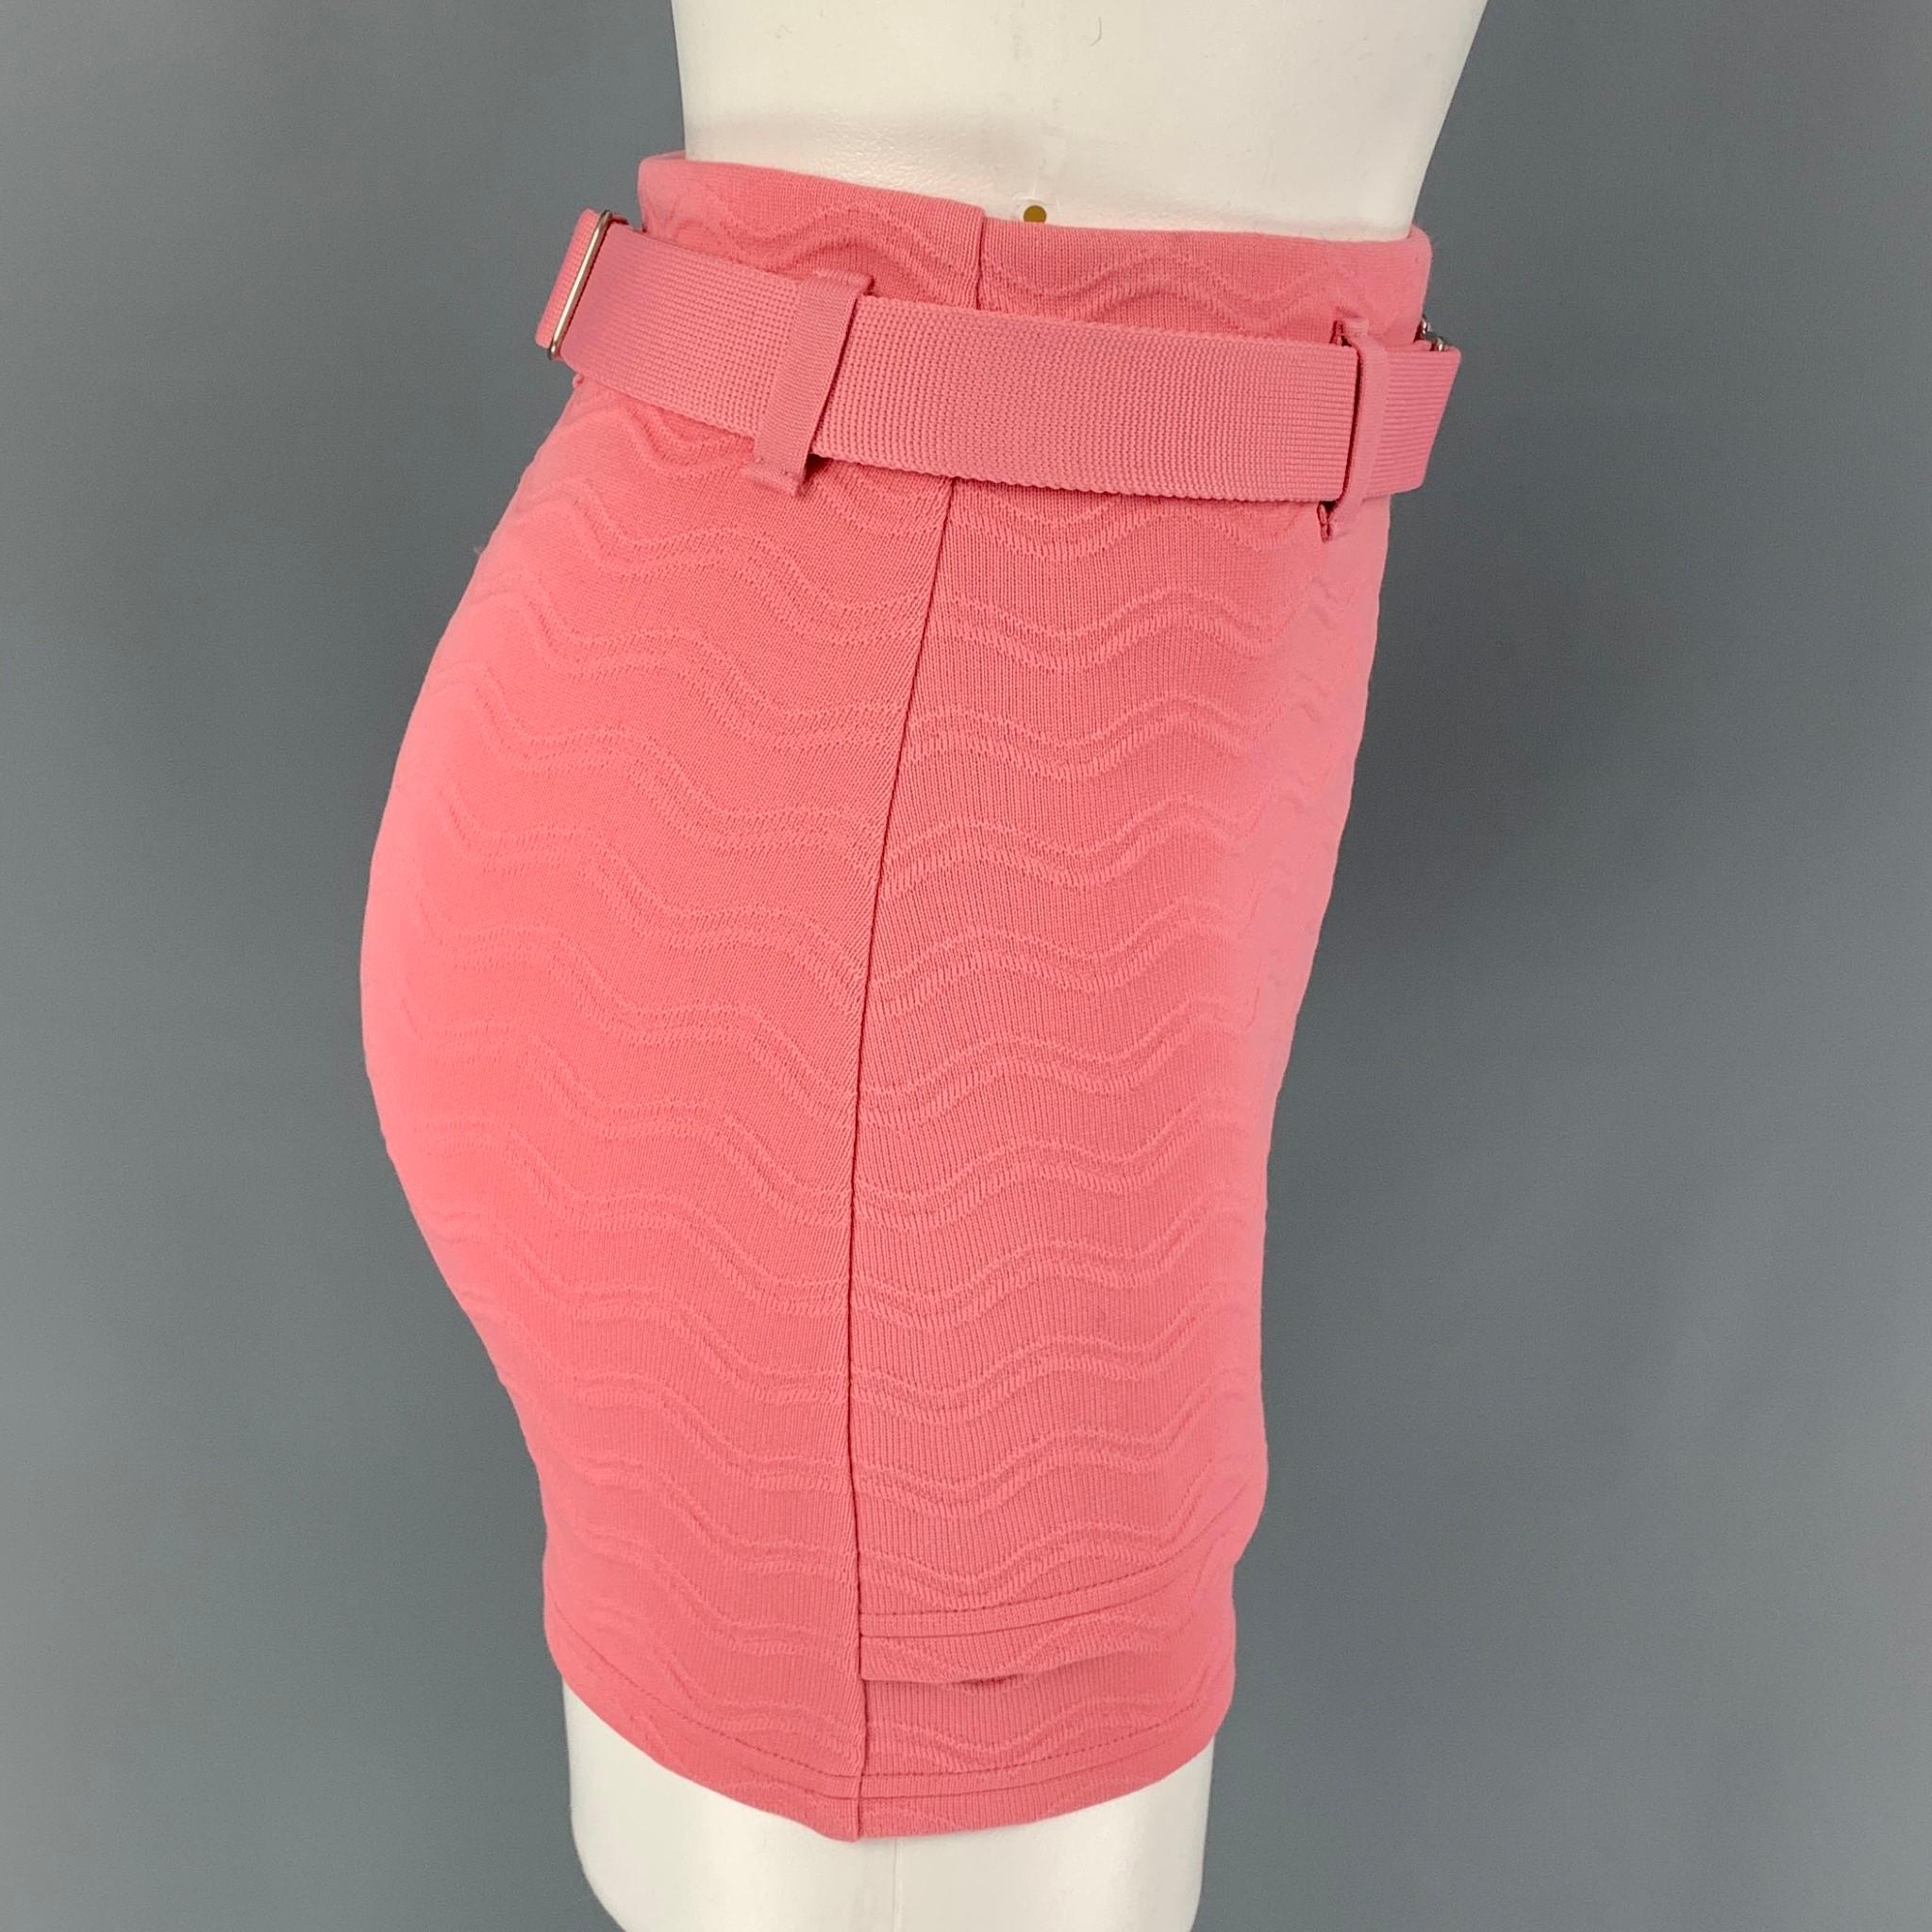 PRADA skirt comes in a pink jacquard polyester blend featuring a shorts style underlay, belt loops, adjustable belt, logo engraved silver tone hardware, and a side zipper closure. Made in Italy. 

Excellent Pre-Owned Condition.
Marked: 38
Original